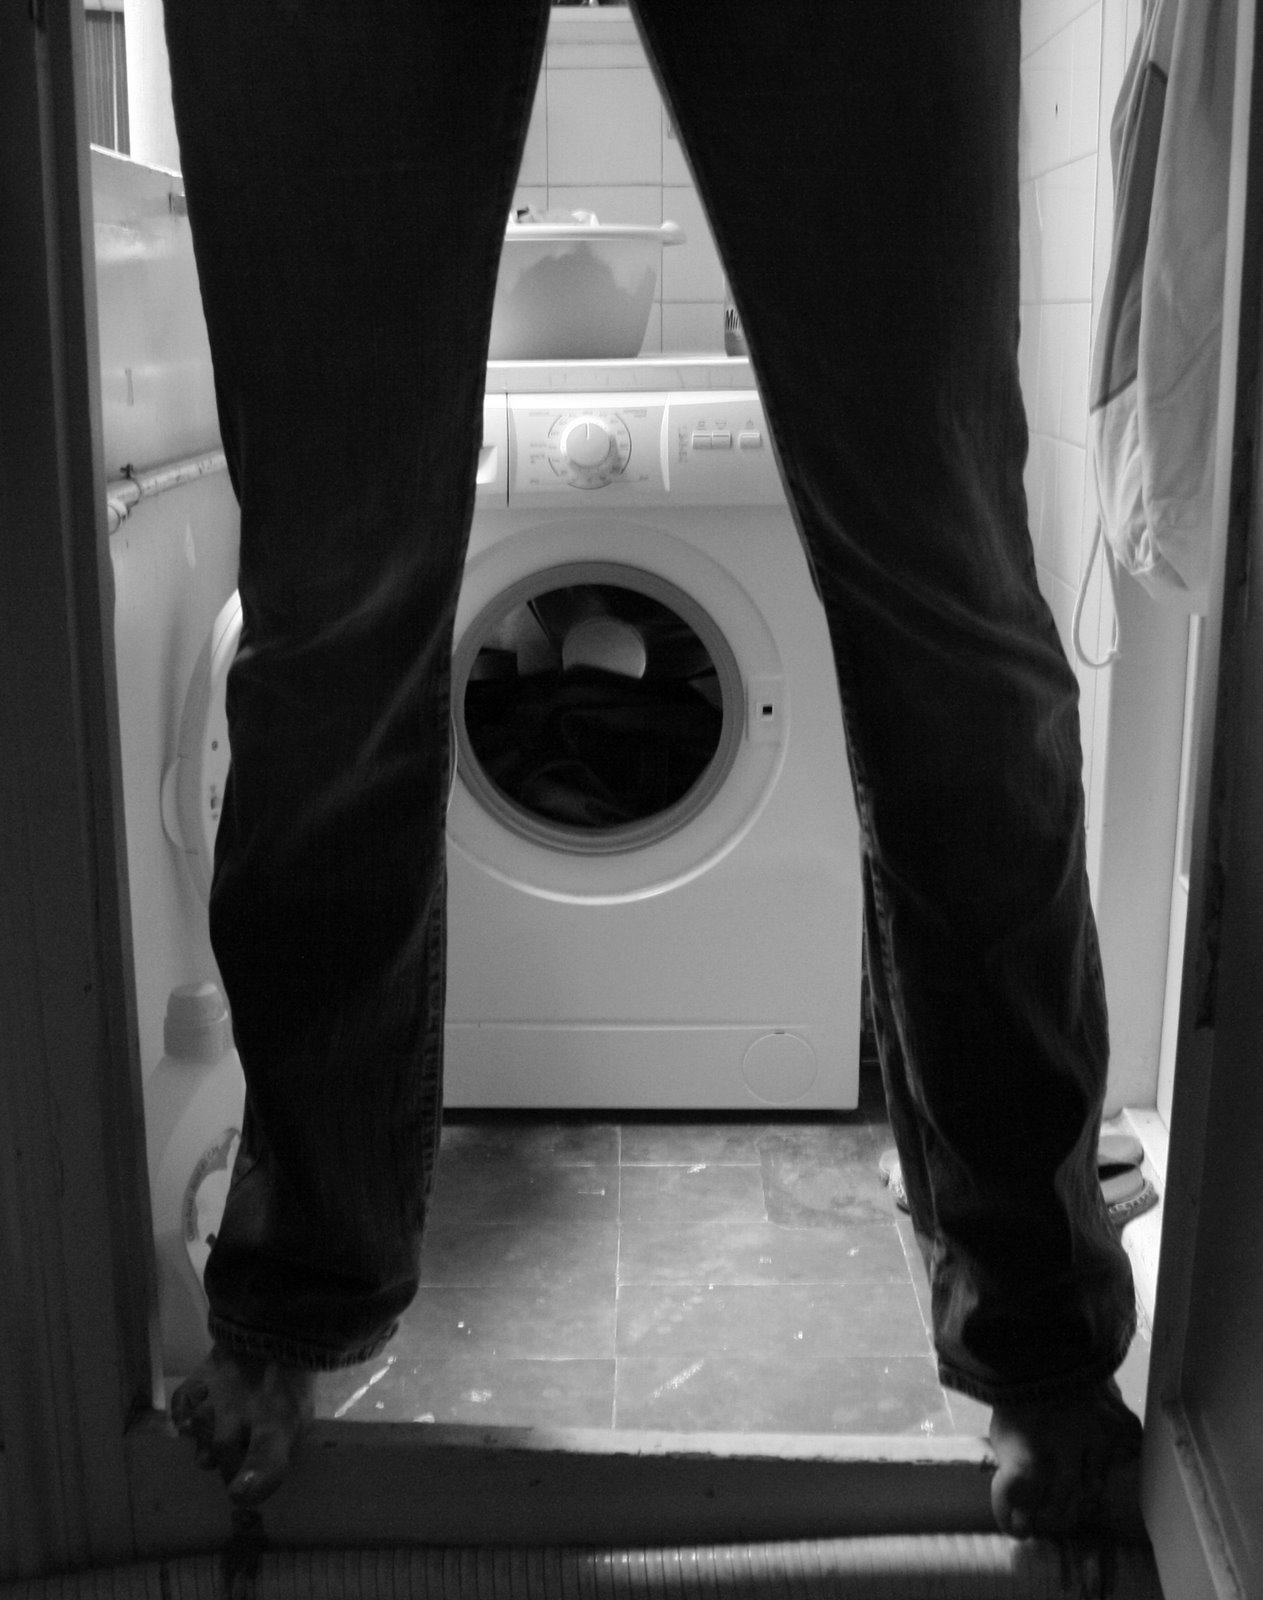 Photo description: a washing machine in the background; two legs in the foreground